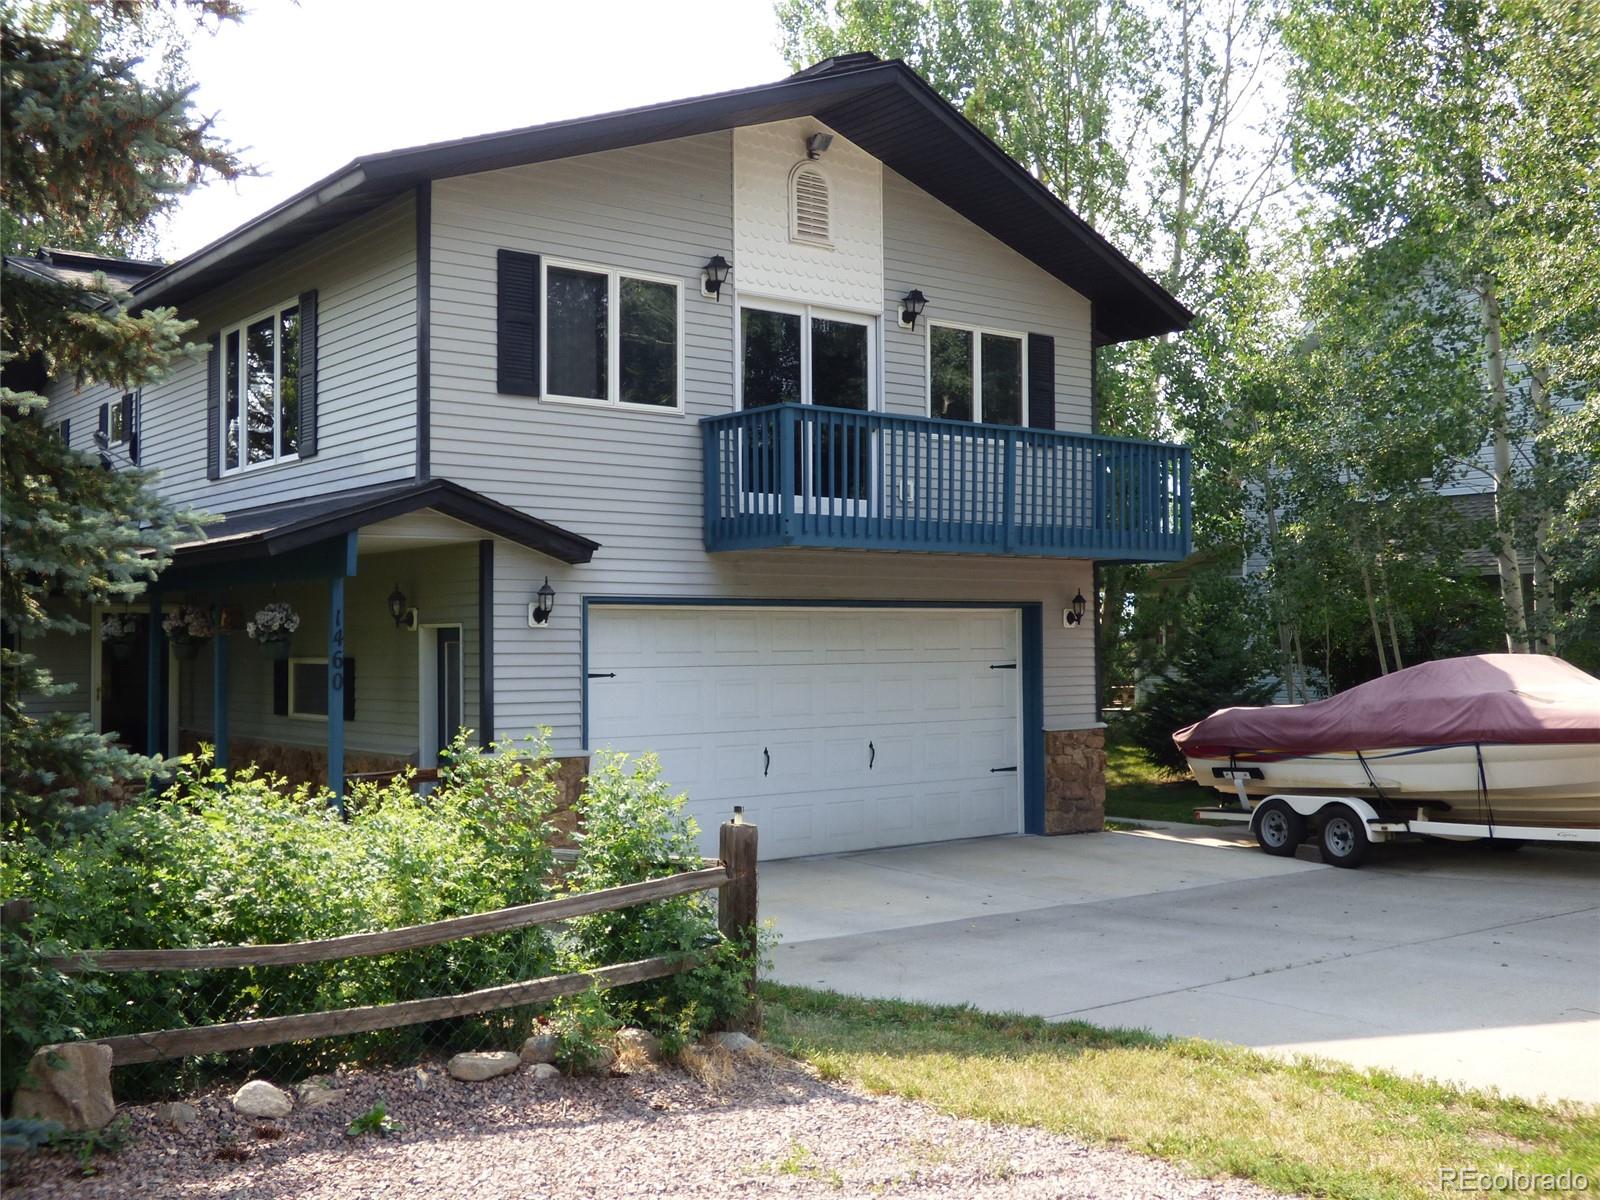 1460 Park, Steamboat Springs, CO